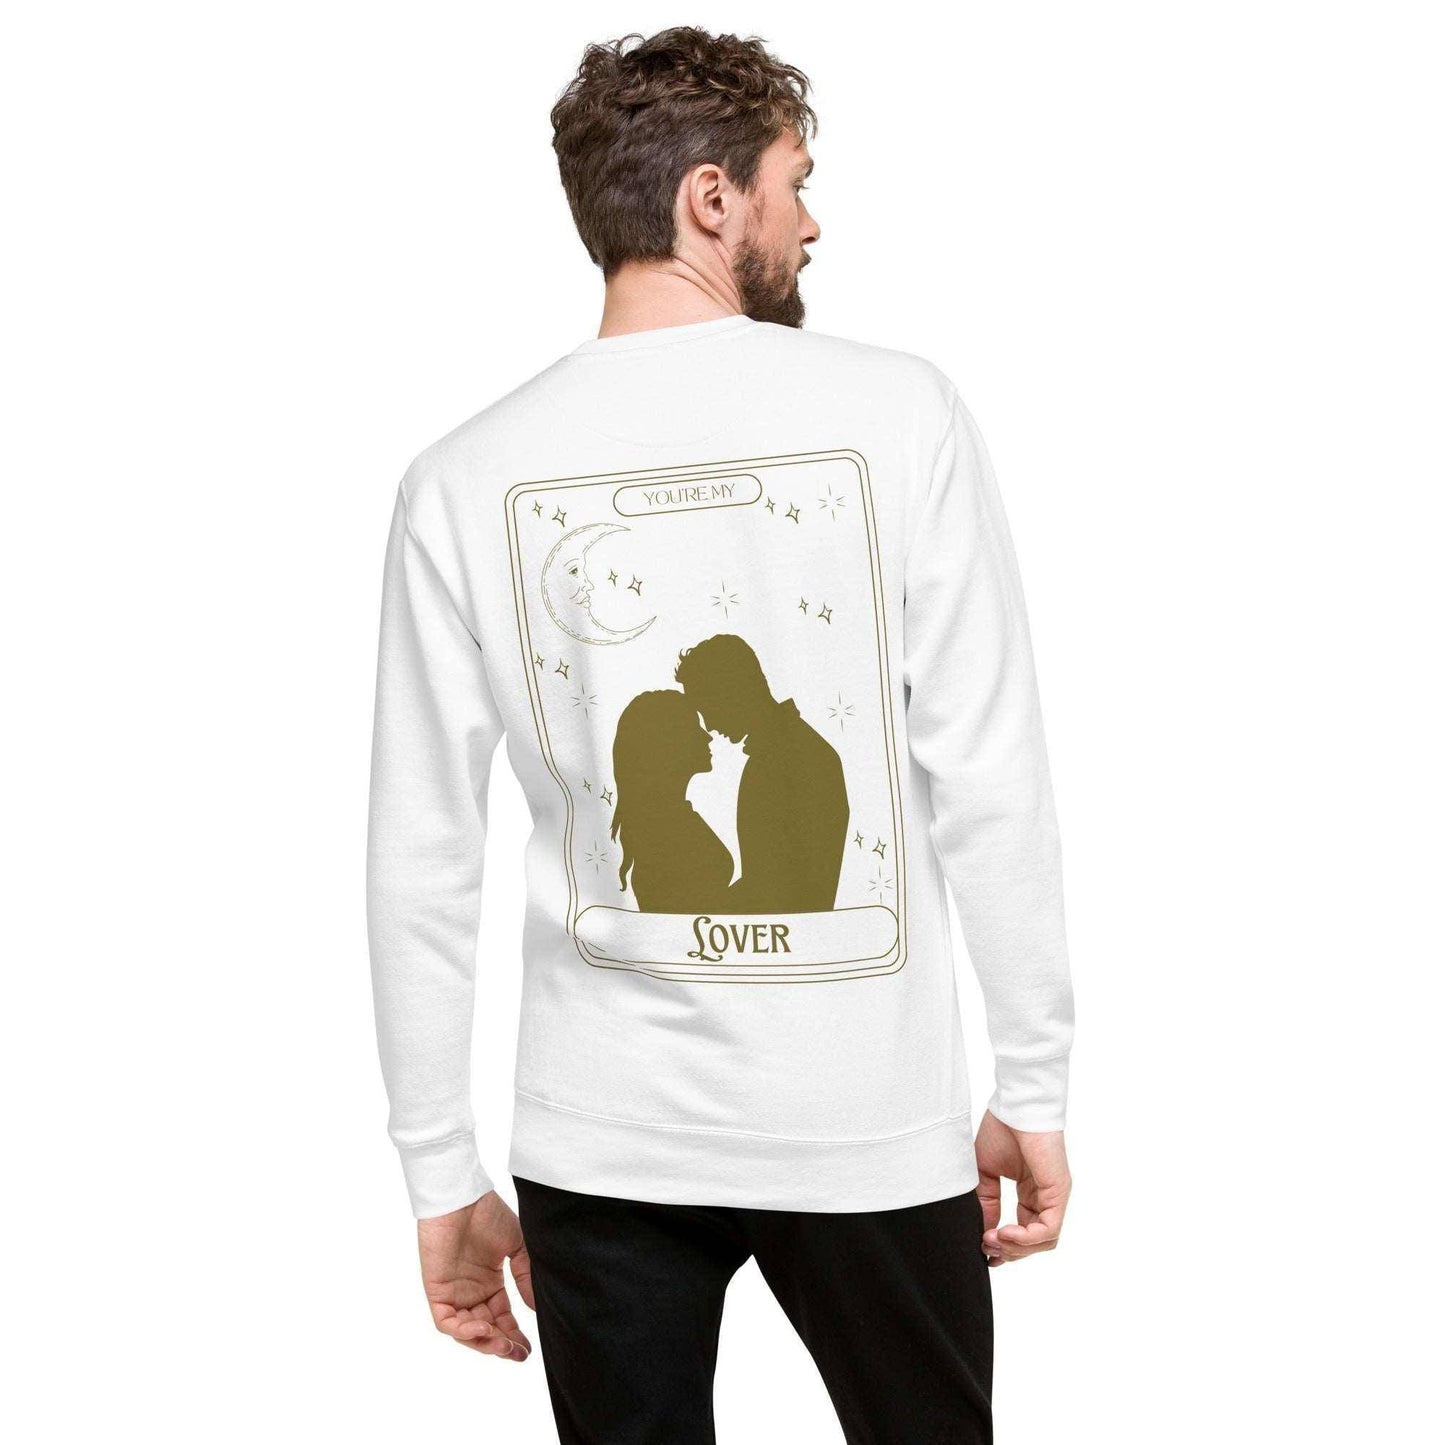 Taylor Swift Lover Embroidered Sweatshirt